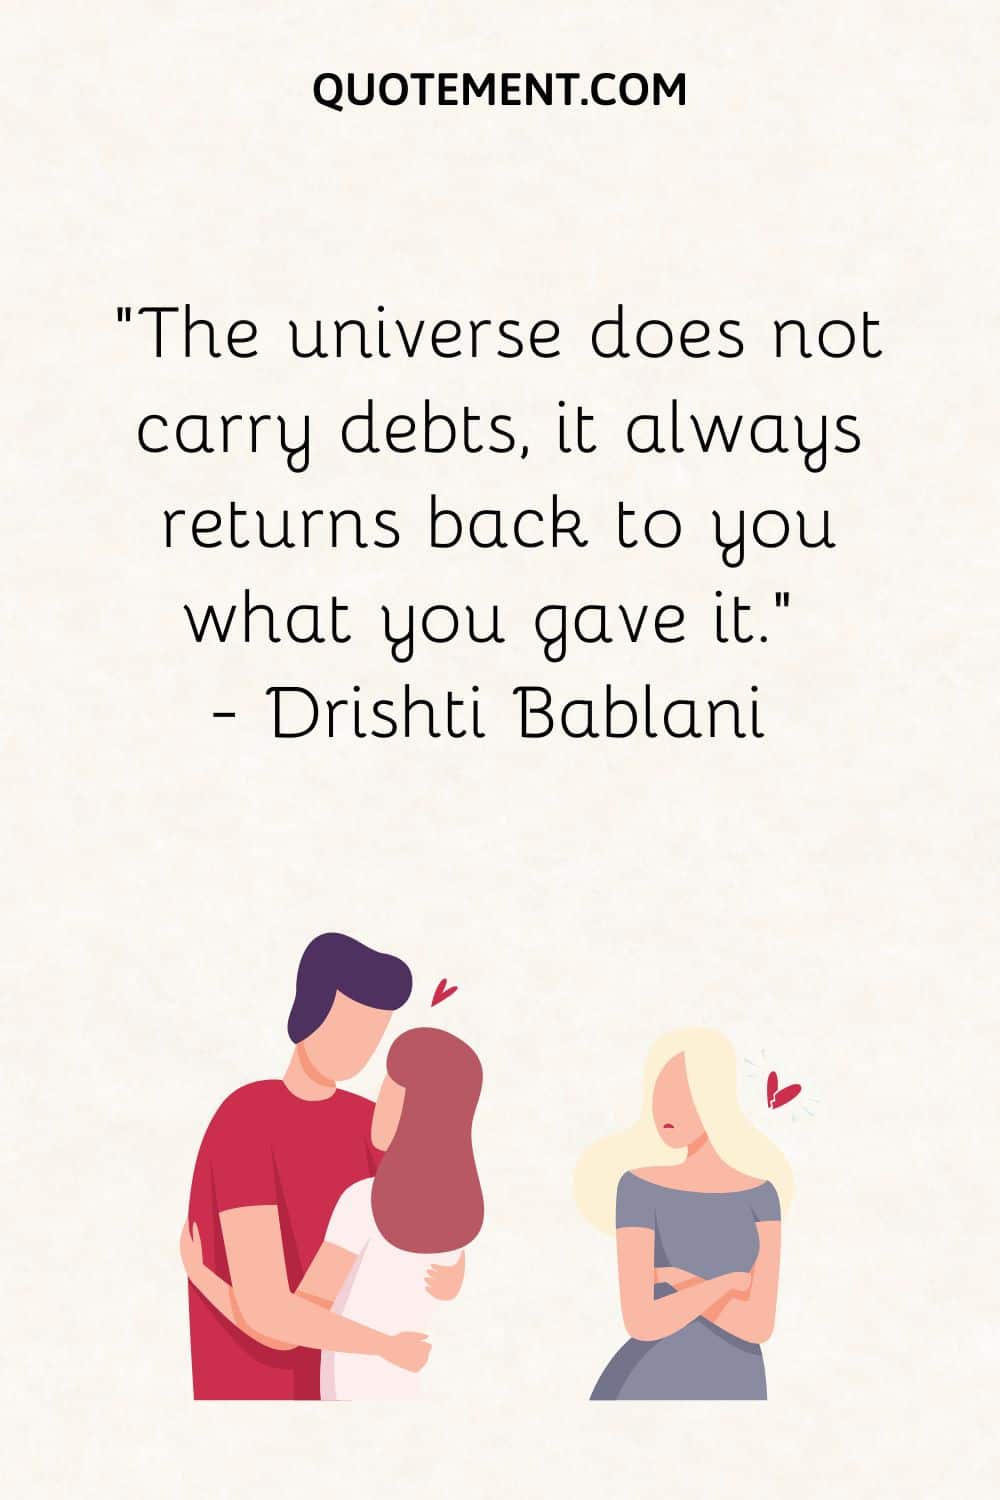 The universe does not carry debts, it always returns back to you what you gave it